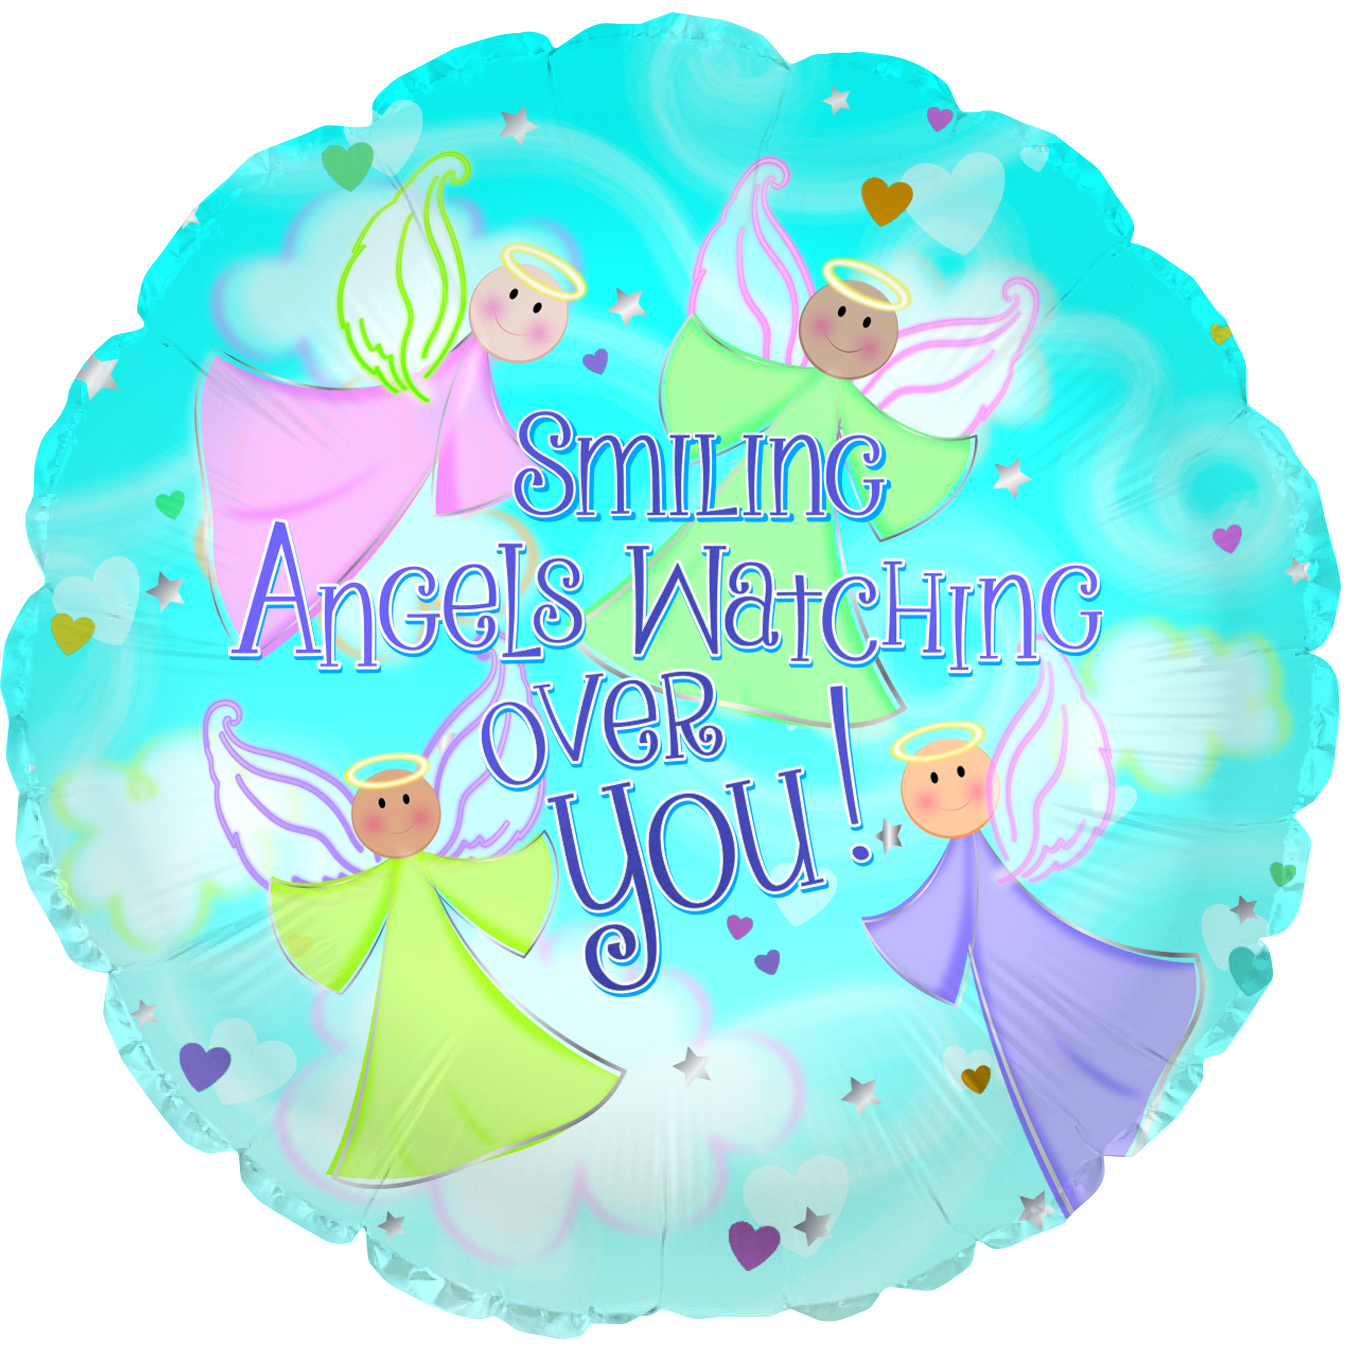 Smiling Angels Watch Over You